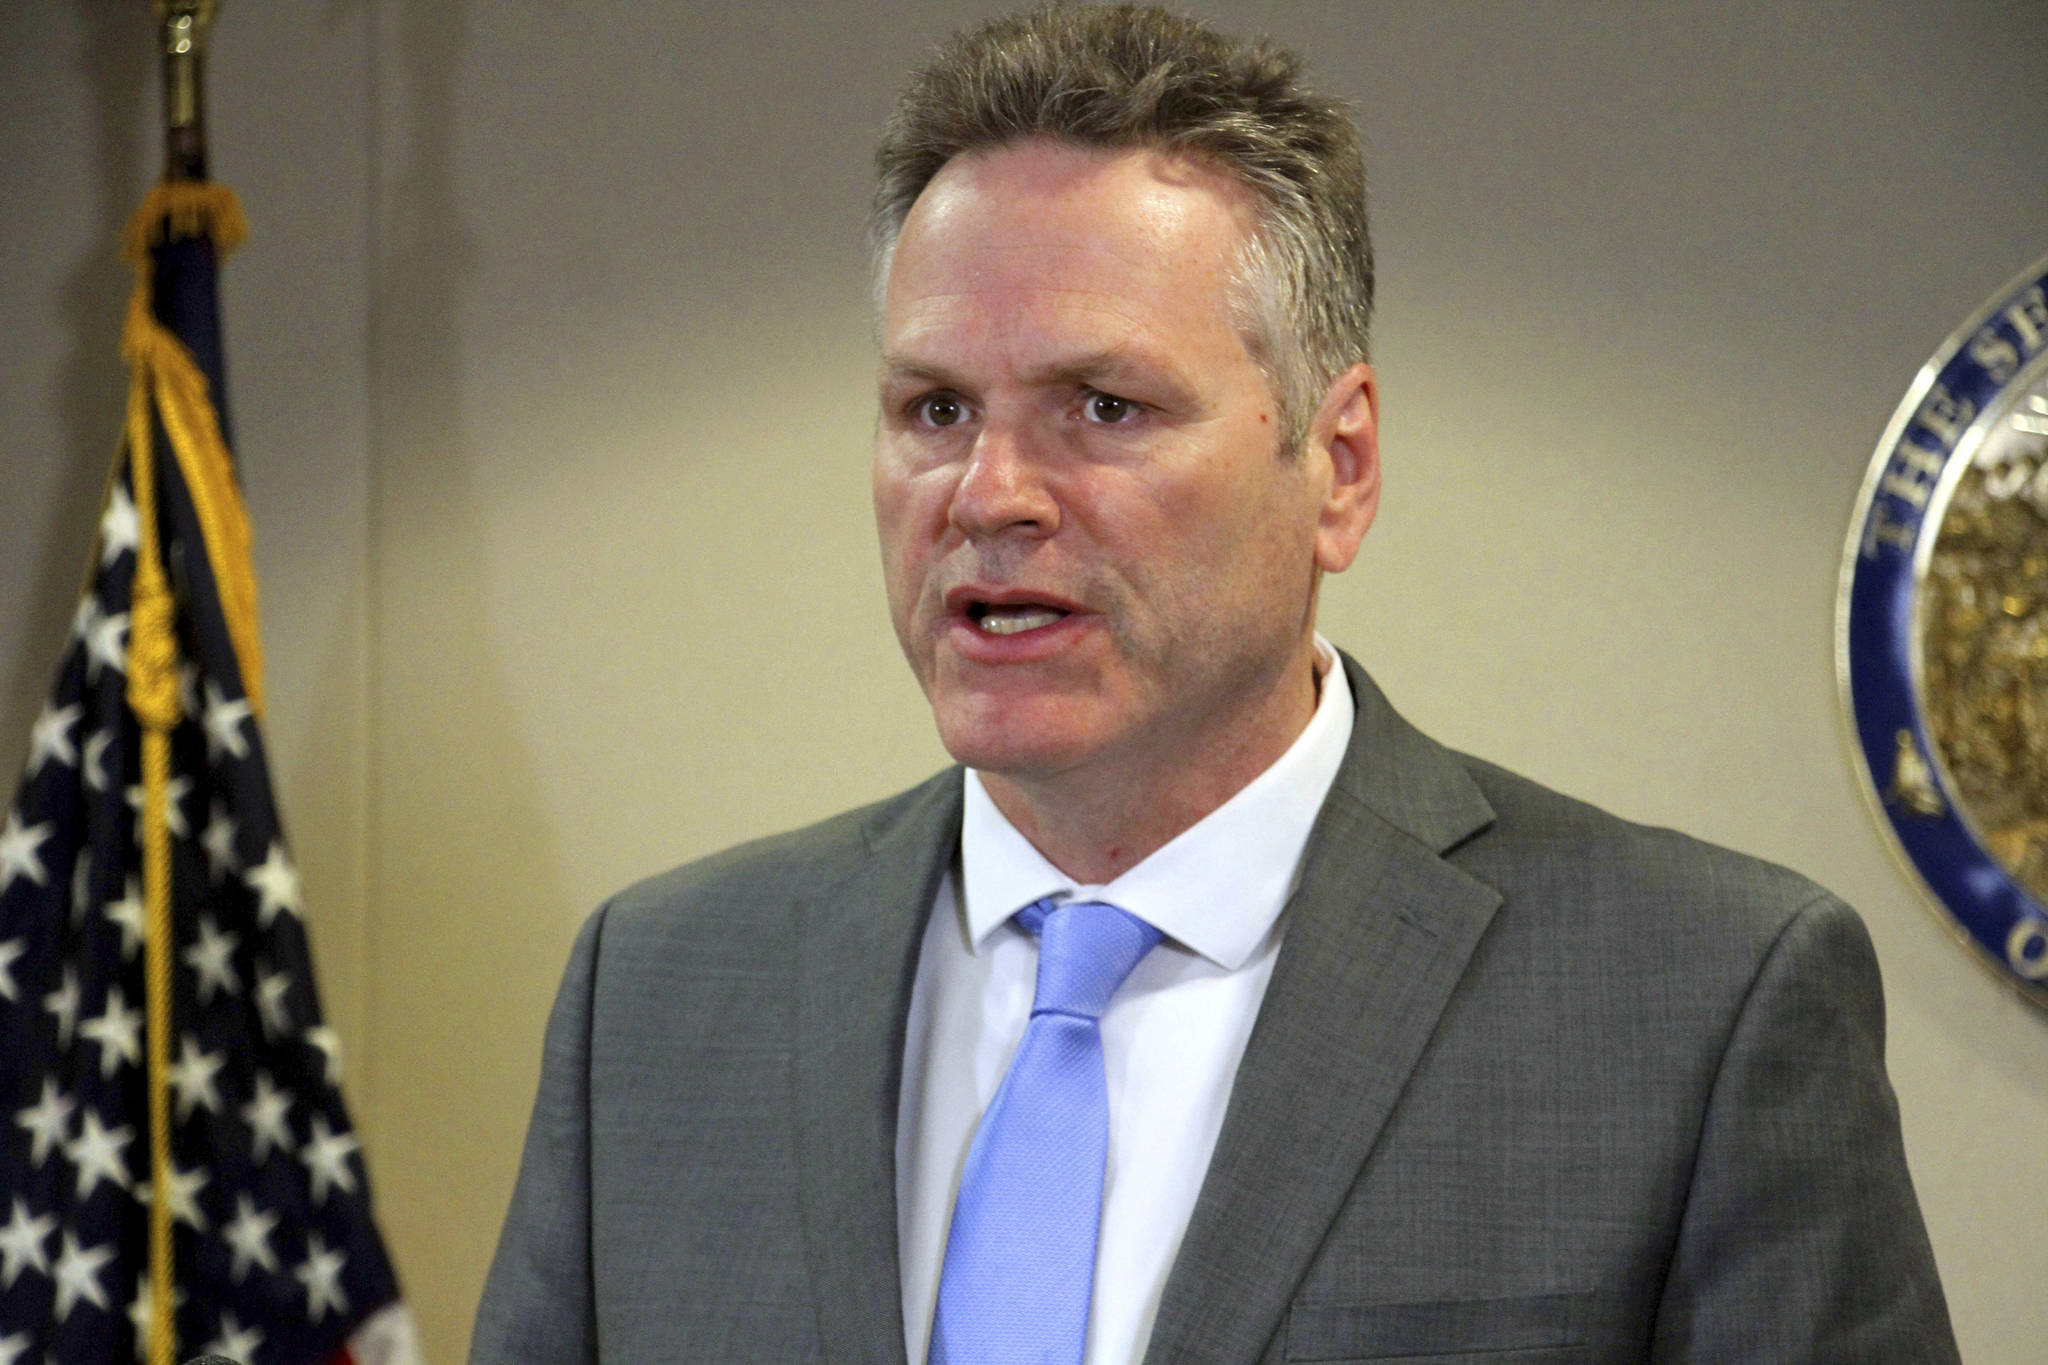 Alaska Gov. Mike Dunleavy addresses reporters at a news conference Monday, March 9, 2020, in Anchorage, Alaska. State officials said 23 people have been tested for the new coronavirus with no positive results. (AP Photo/Mark Thiessen)